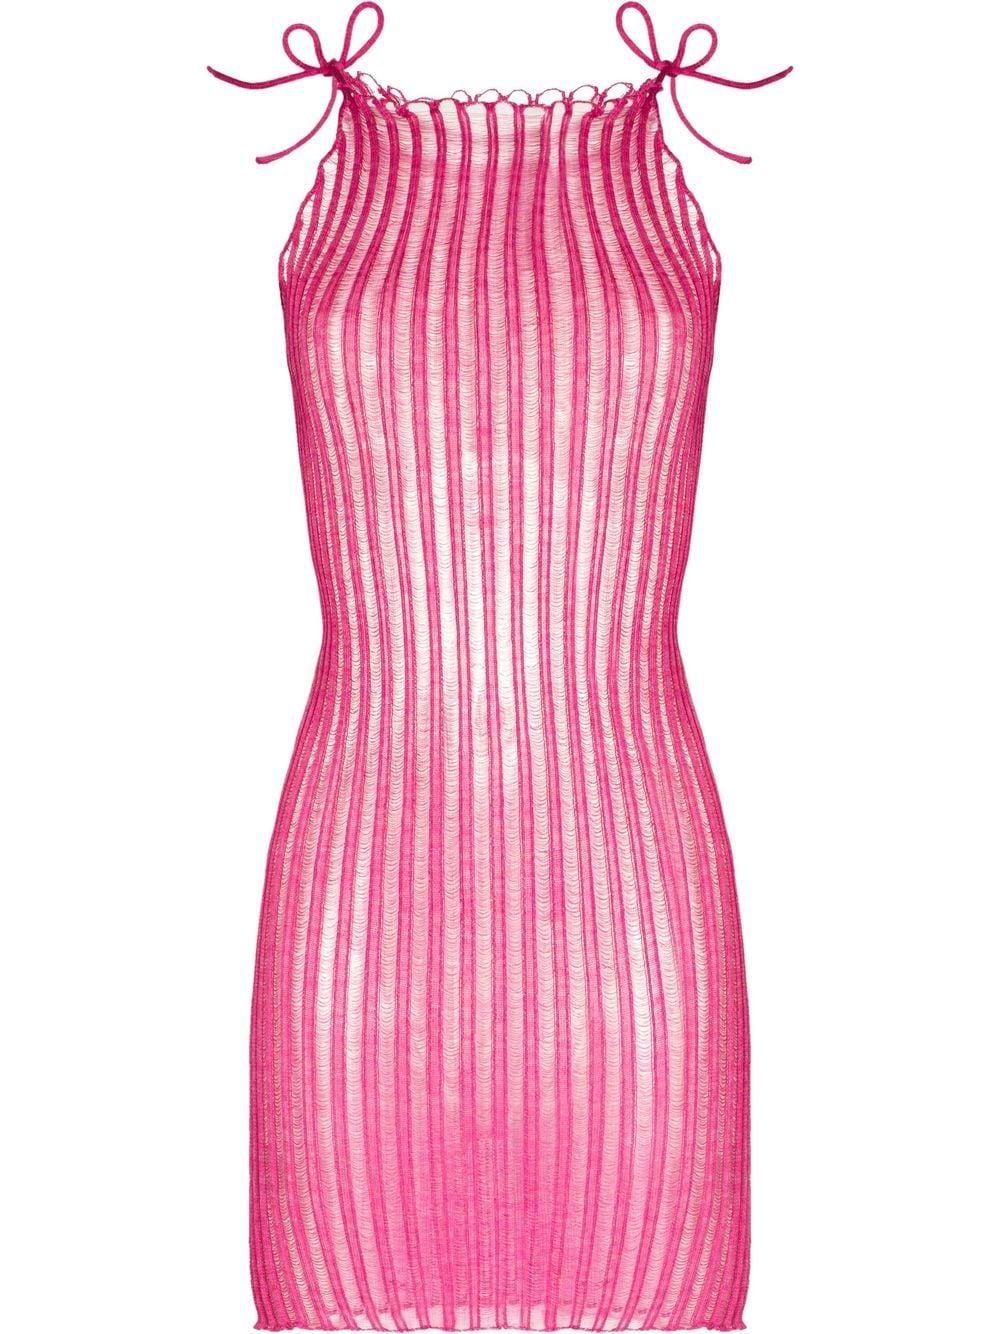 a. roege hove Patricia Ribbed-knit Minidress in Pink | Lyst